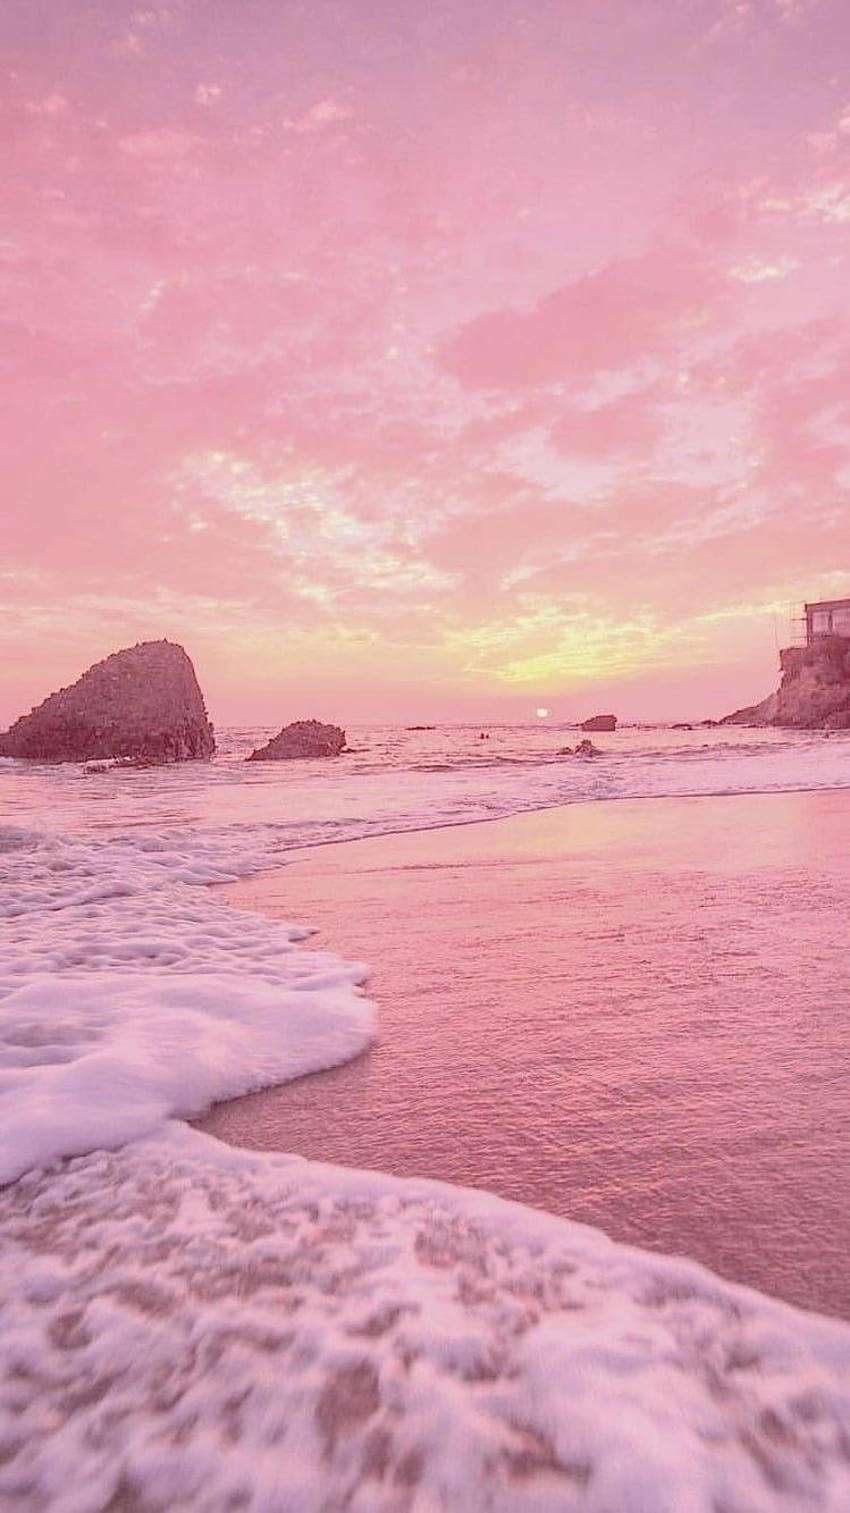 Pink beach ! Love this 10/10 recommend for aesthetic cute vibe!, cute beach HD phone wallpaper